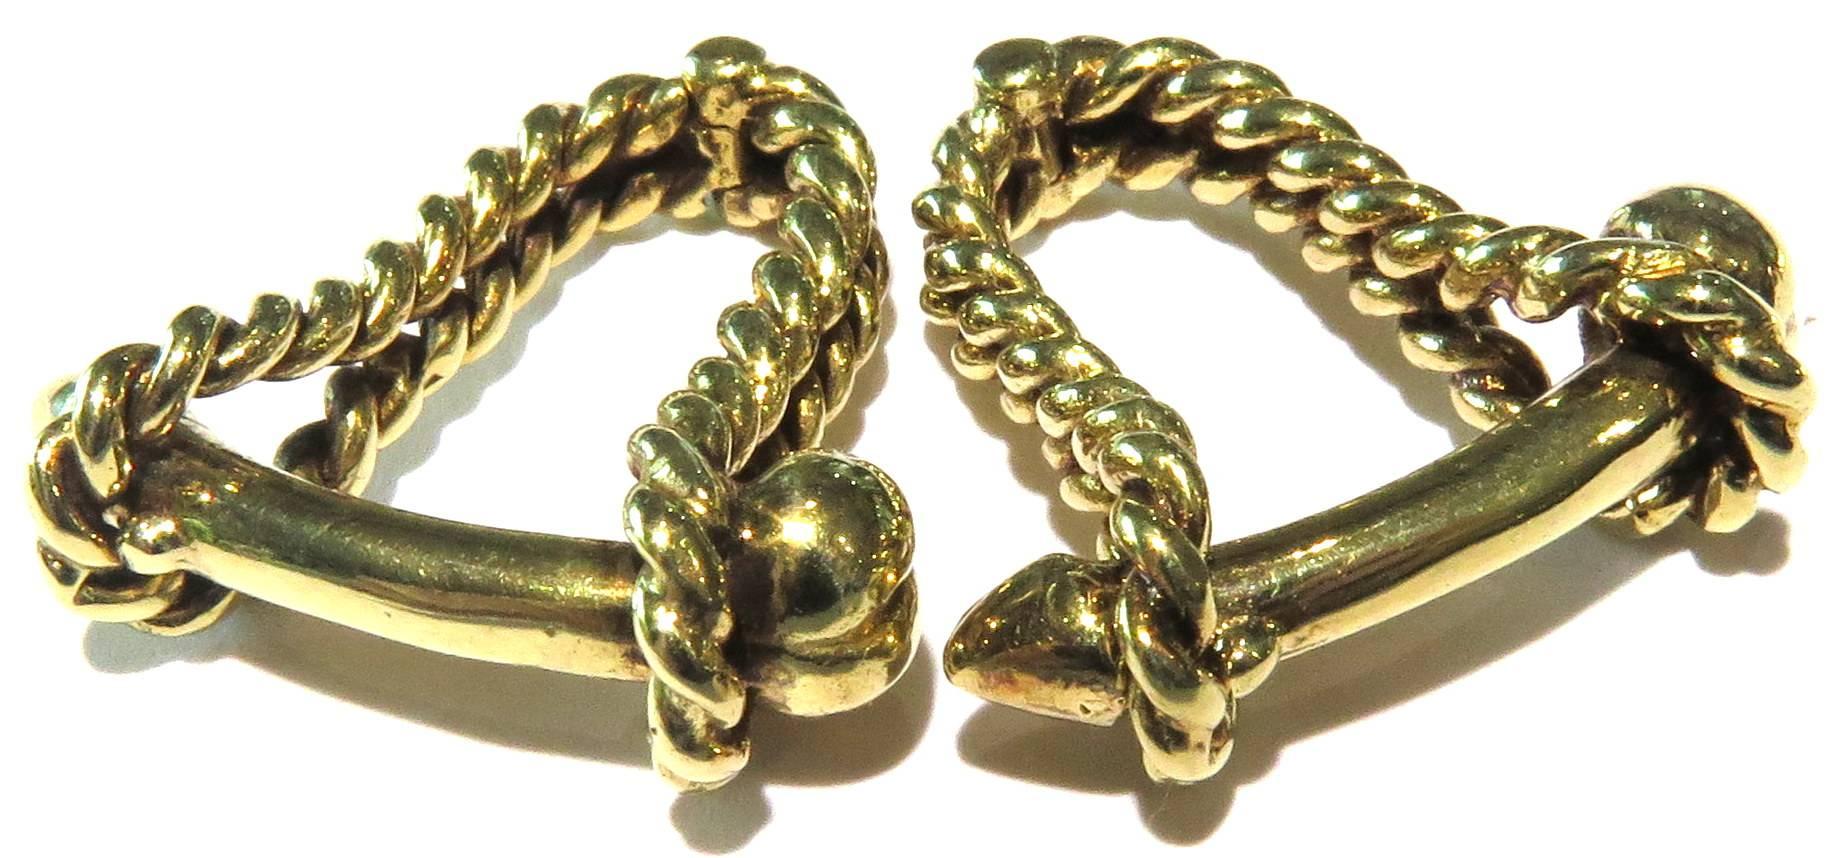 These unique cufflinks are 14k yellow gold.
They weigh 11.6 grams
They measure 15/16 inch cross the shaft
